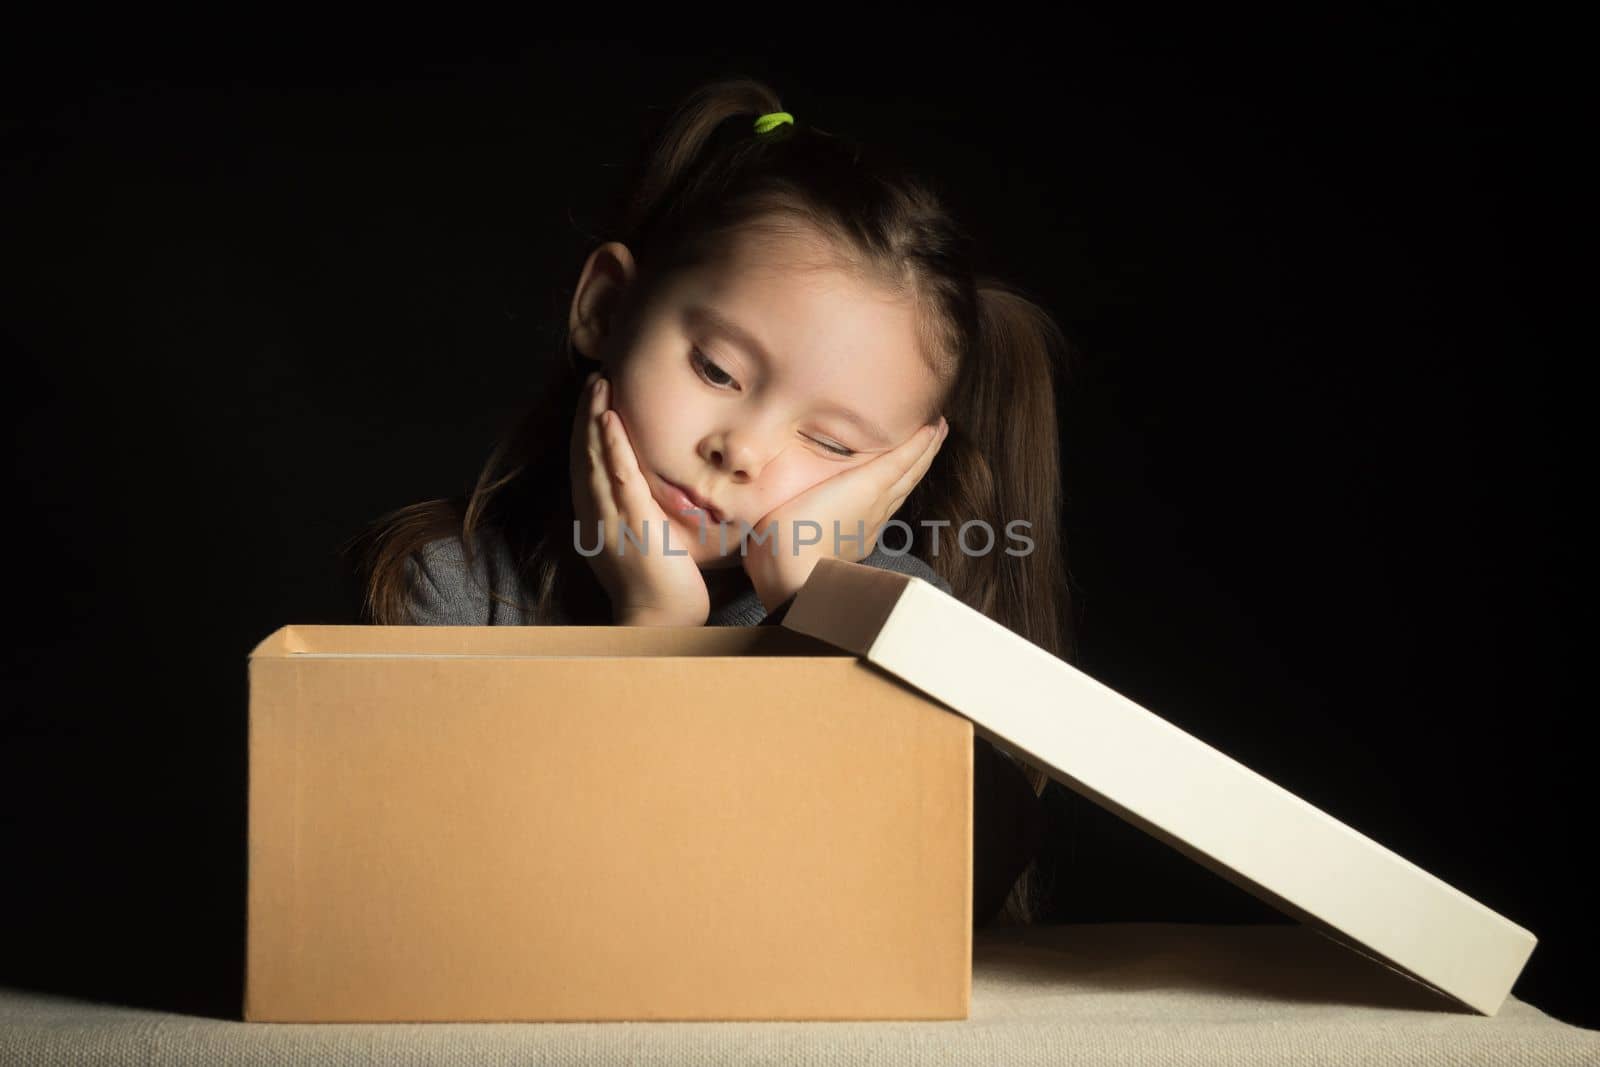 Upset and disappointed little girl opens a long-awaited parcel with a gift, copy space on cardboard box.